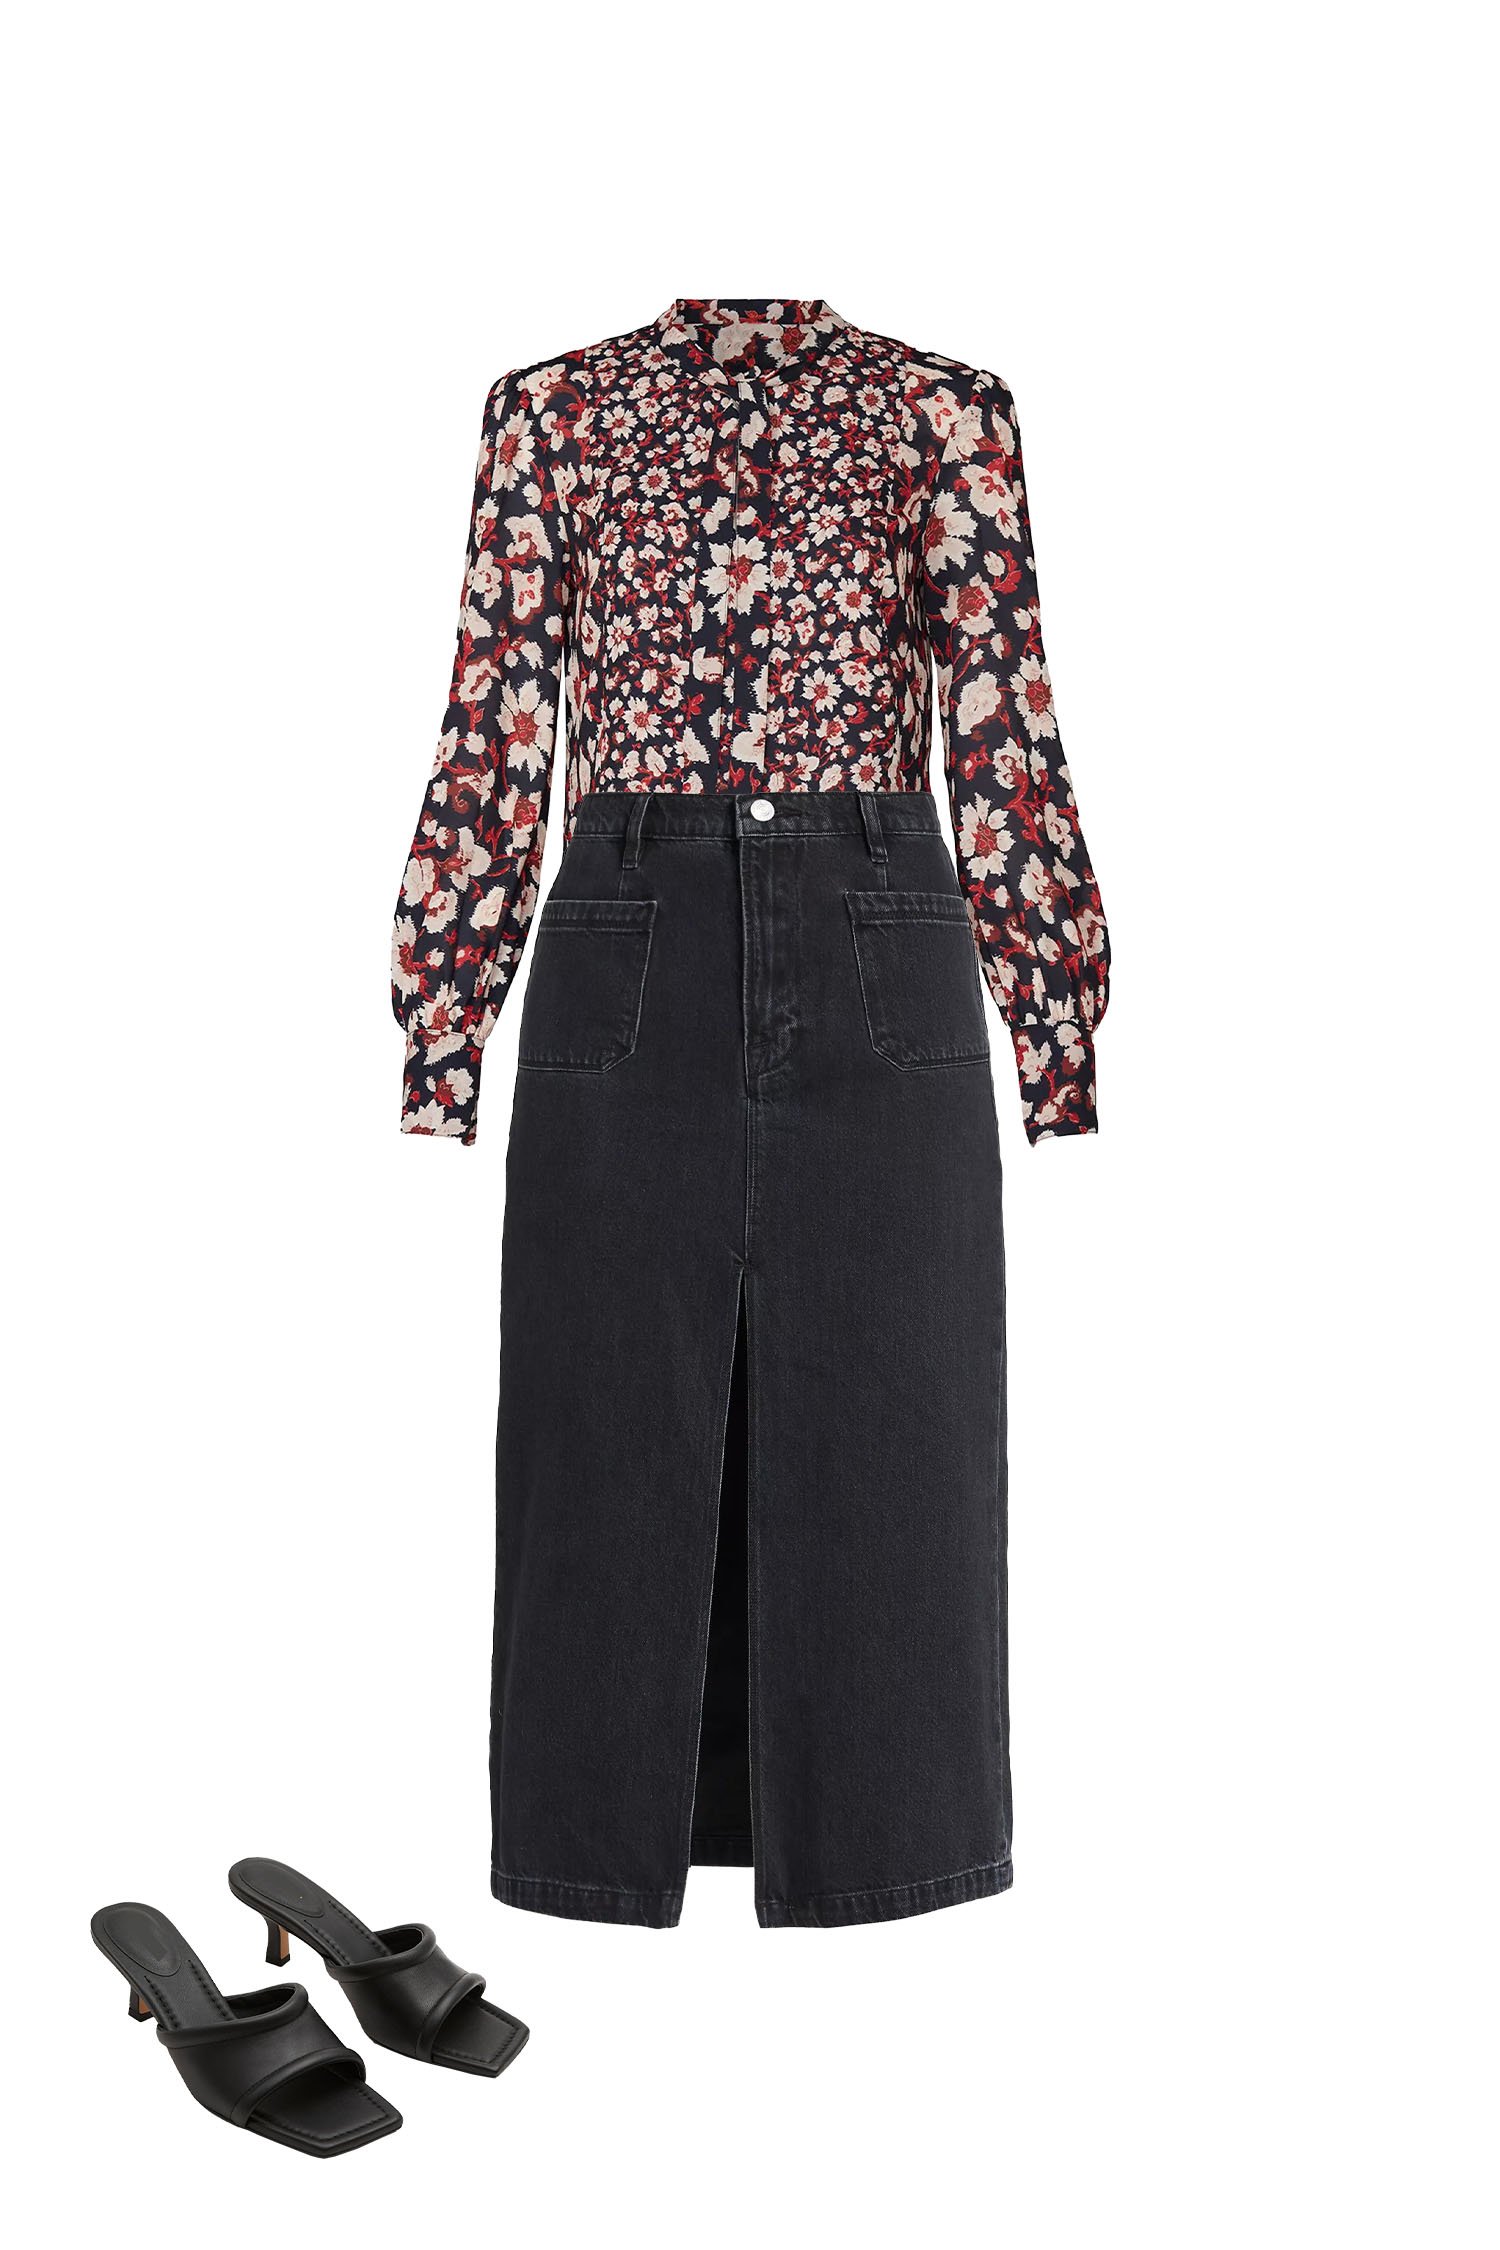 Black Denim Midi Skirt Outfit with Black and Red Floral Blouse, and Black Square Toe Kitten Heel Sandals